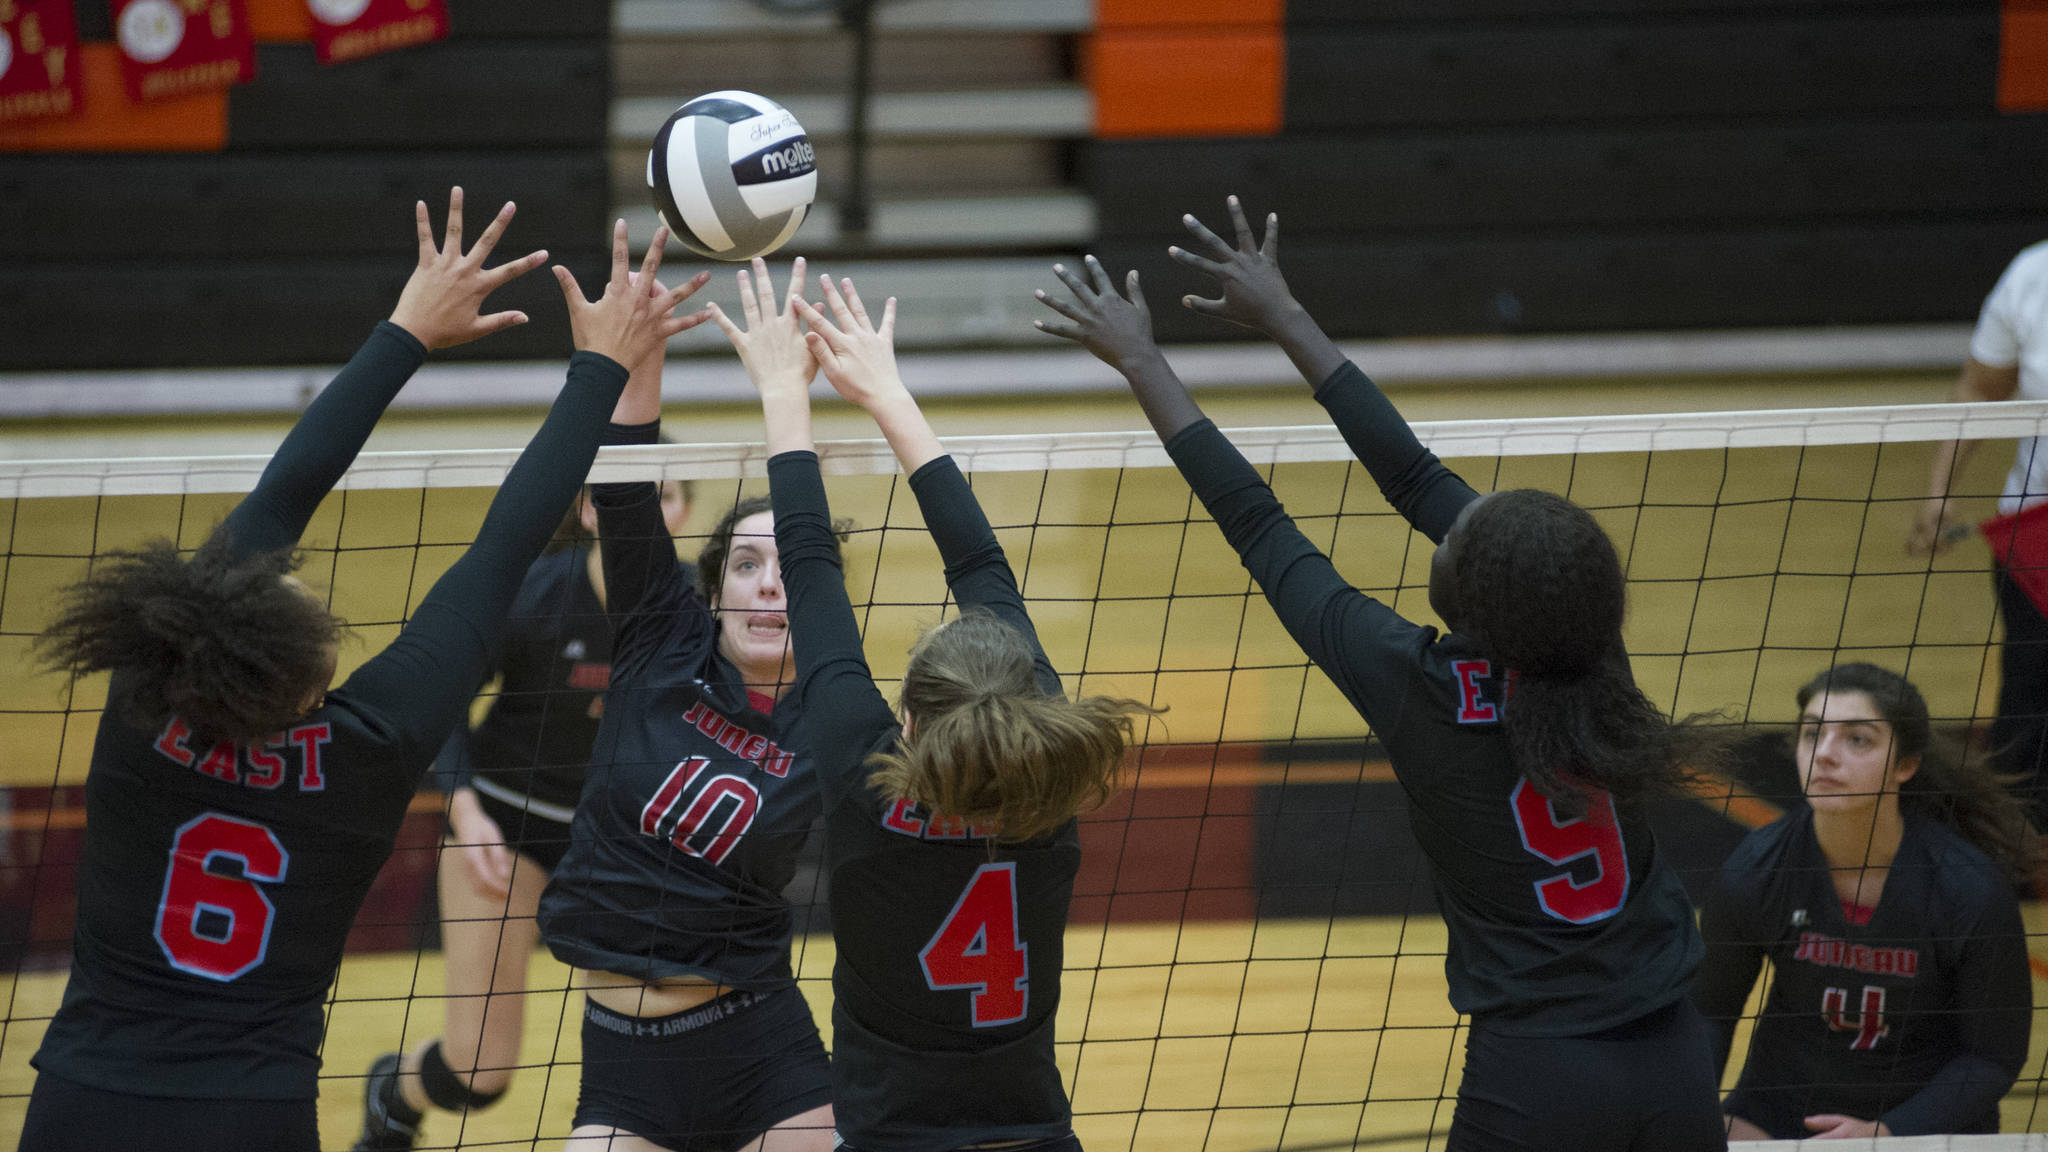 East Anchorage’s Daisy Page (6), Riley Ostrinski (4) and Nyanuer Bidit (9) swarm Juneau-Douglas High School senior middle hitter Jessica Pierce as she sends the ball over the net, Friday, Nov. 10, 2017, at the ASAA/First National Bank Alaska 4A State Volleyball Championships. East Anchorage defeated JDHS 3-0 (25-17, 25-16, 25-20) to eliminate them from the tournament, played at West Anchorage High School Nov. 9-11. (Nolin Ainsworth | Juneau Empire)